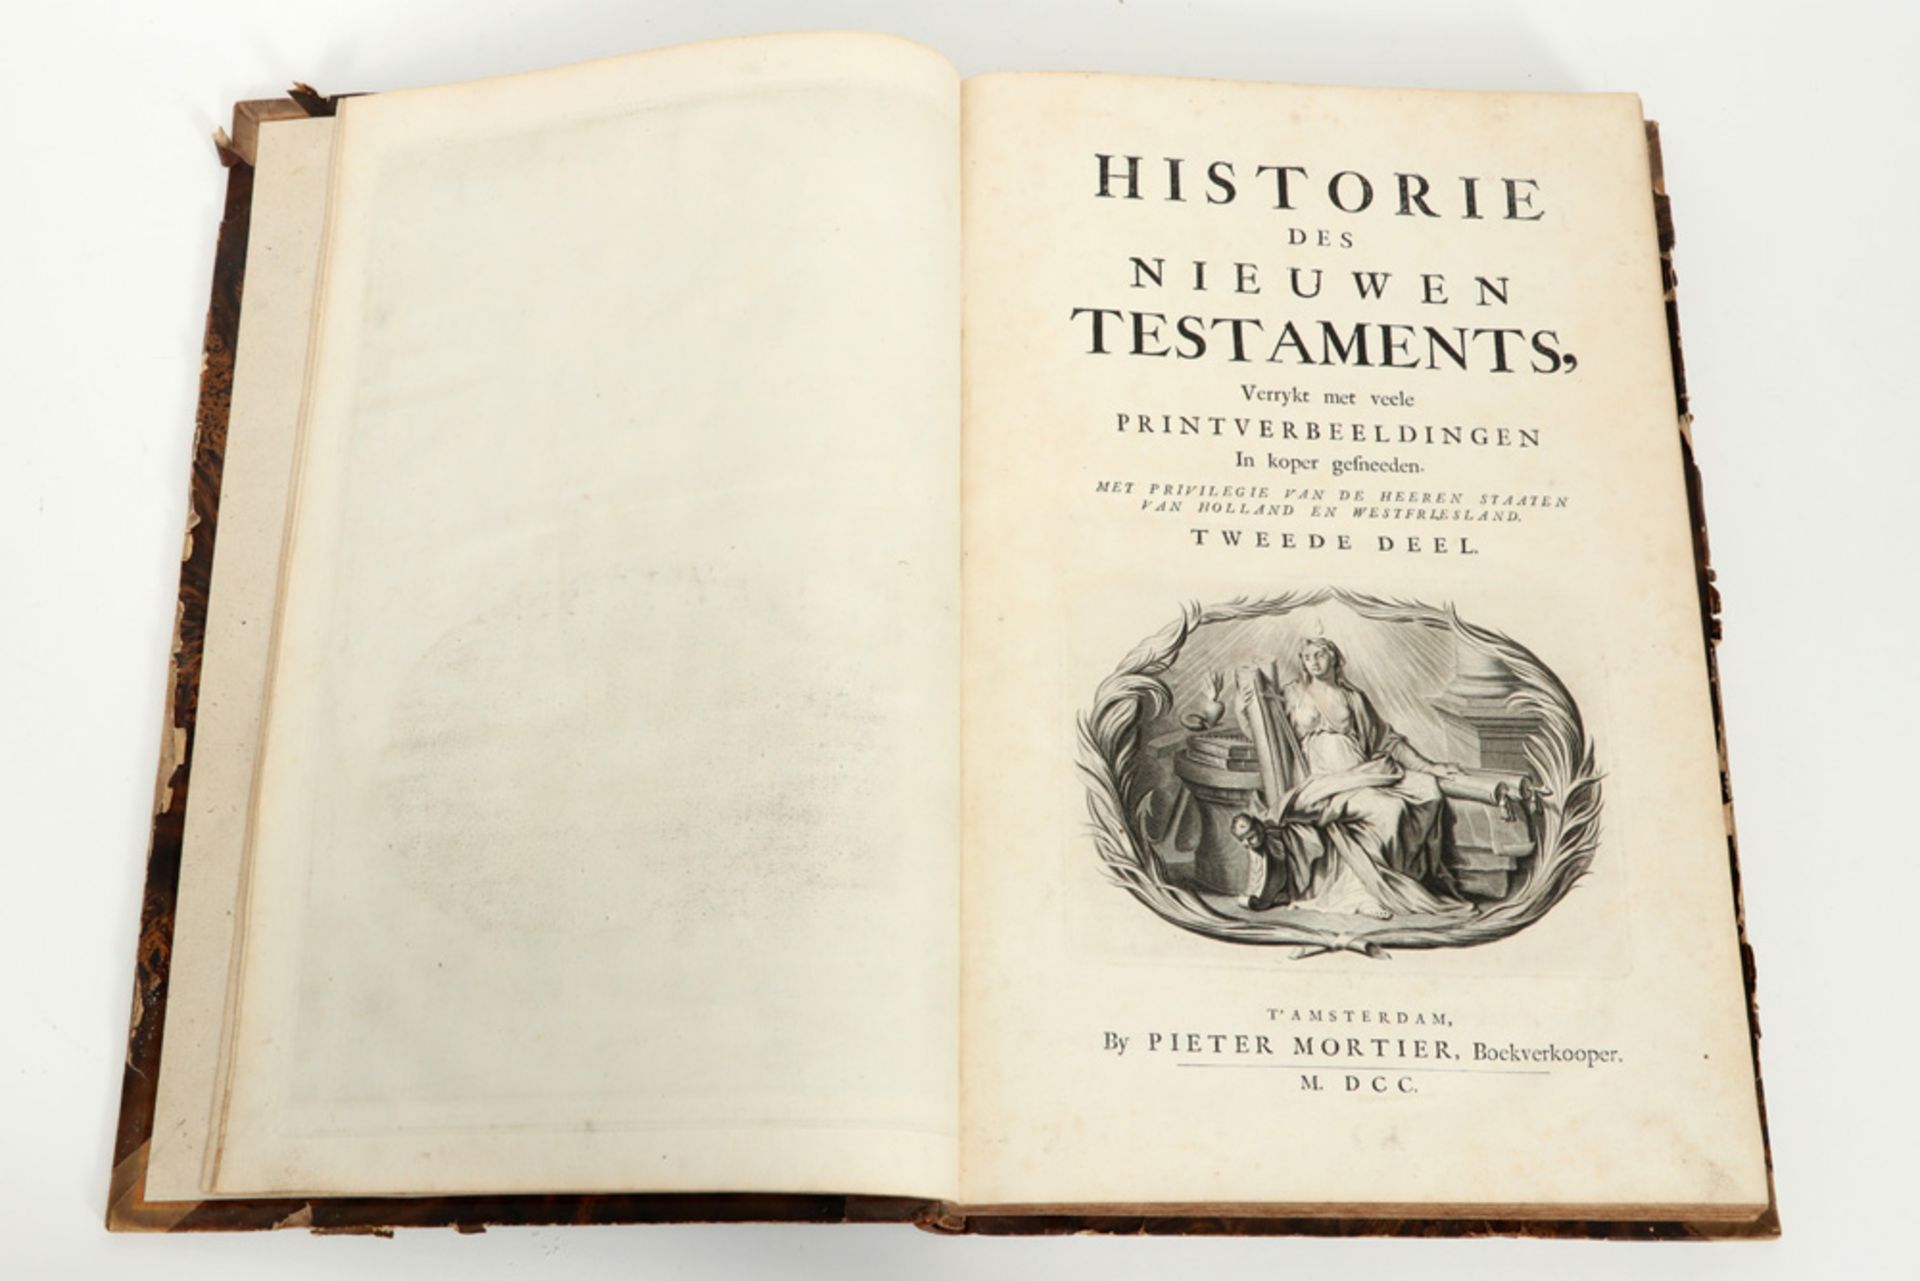 two-part Dutch print bible - the so-called "Mortier" bible - published in 1700 by Pieter Mortier in  - Image 6 of 6